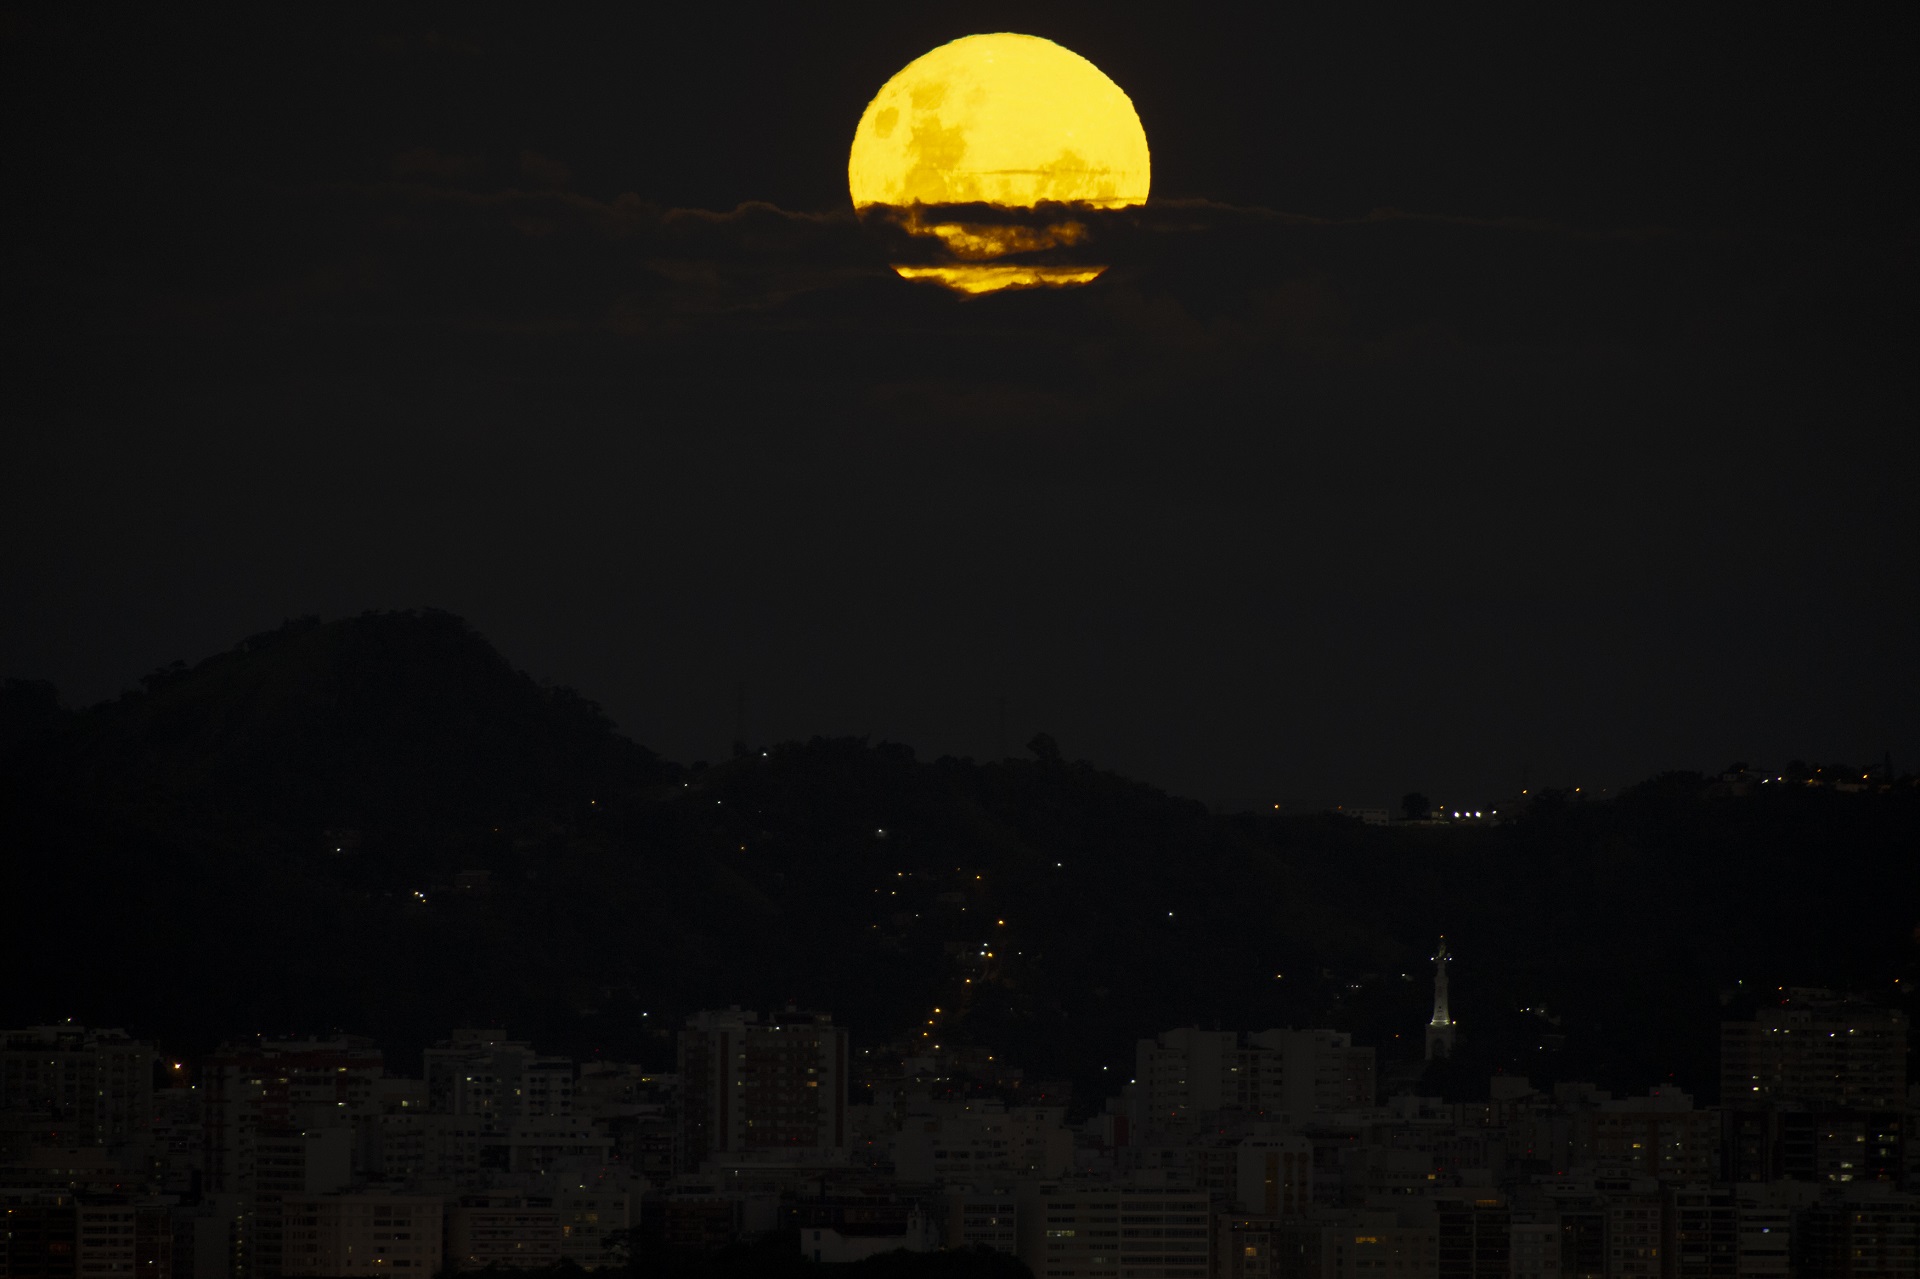 The Blood Moon, a full moon that coincides with a full lunar eclipse and that has a reddish appearance, rises over the city of Rio de Janeiro, Brazil on May 15, 2022.